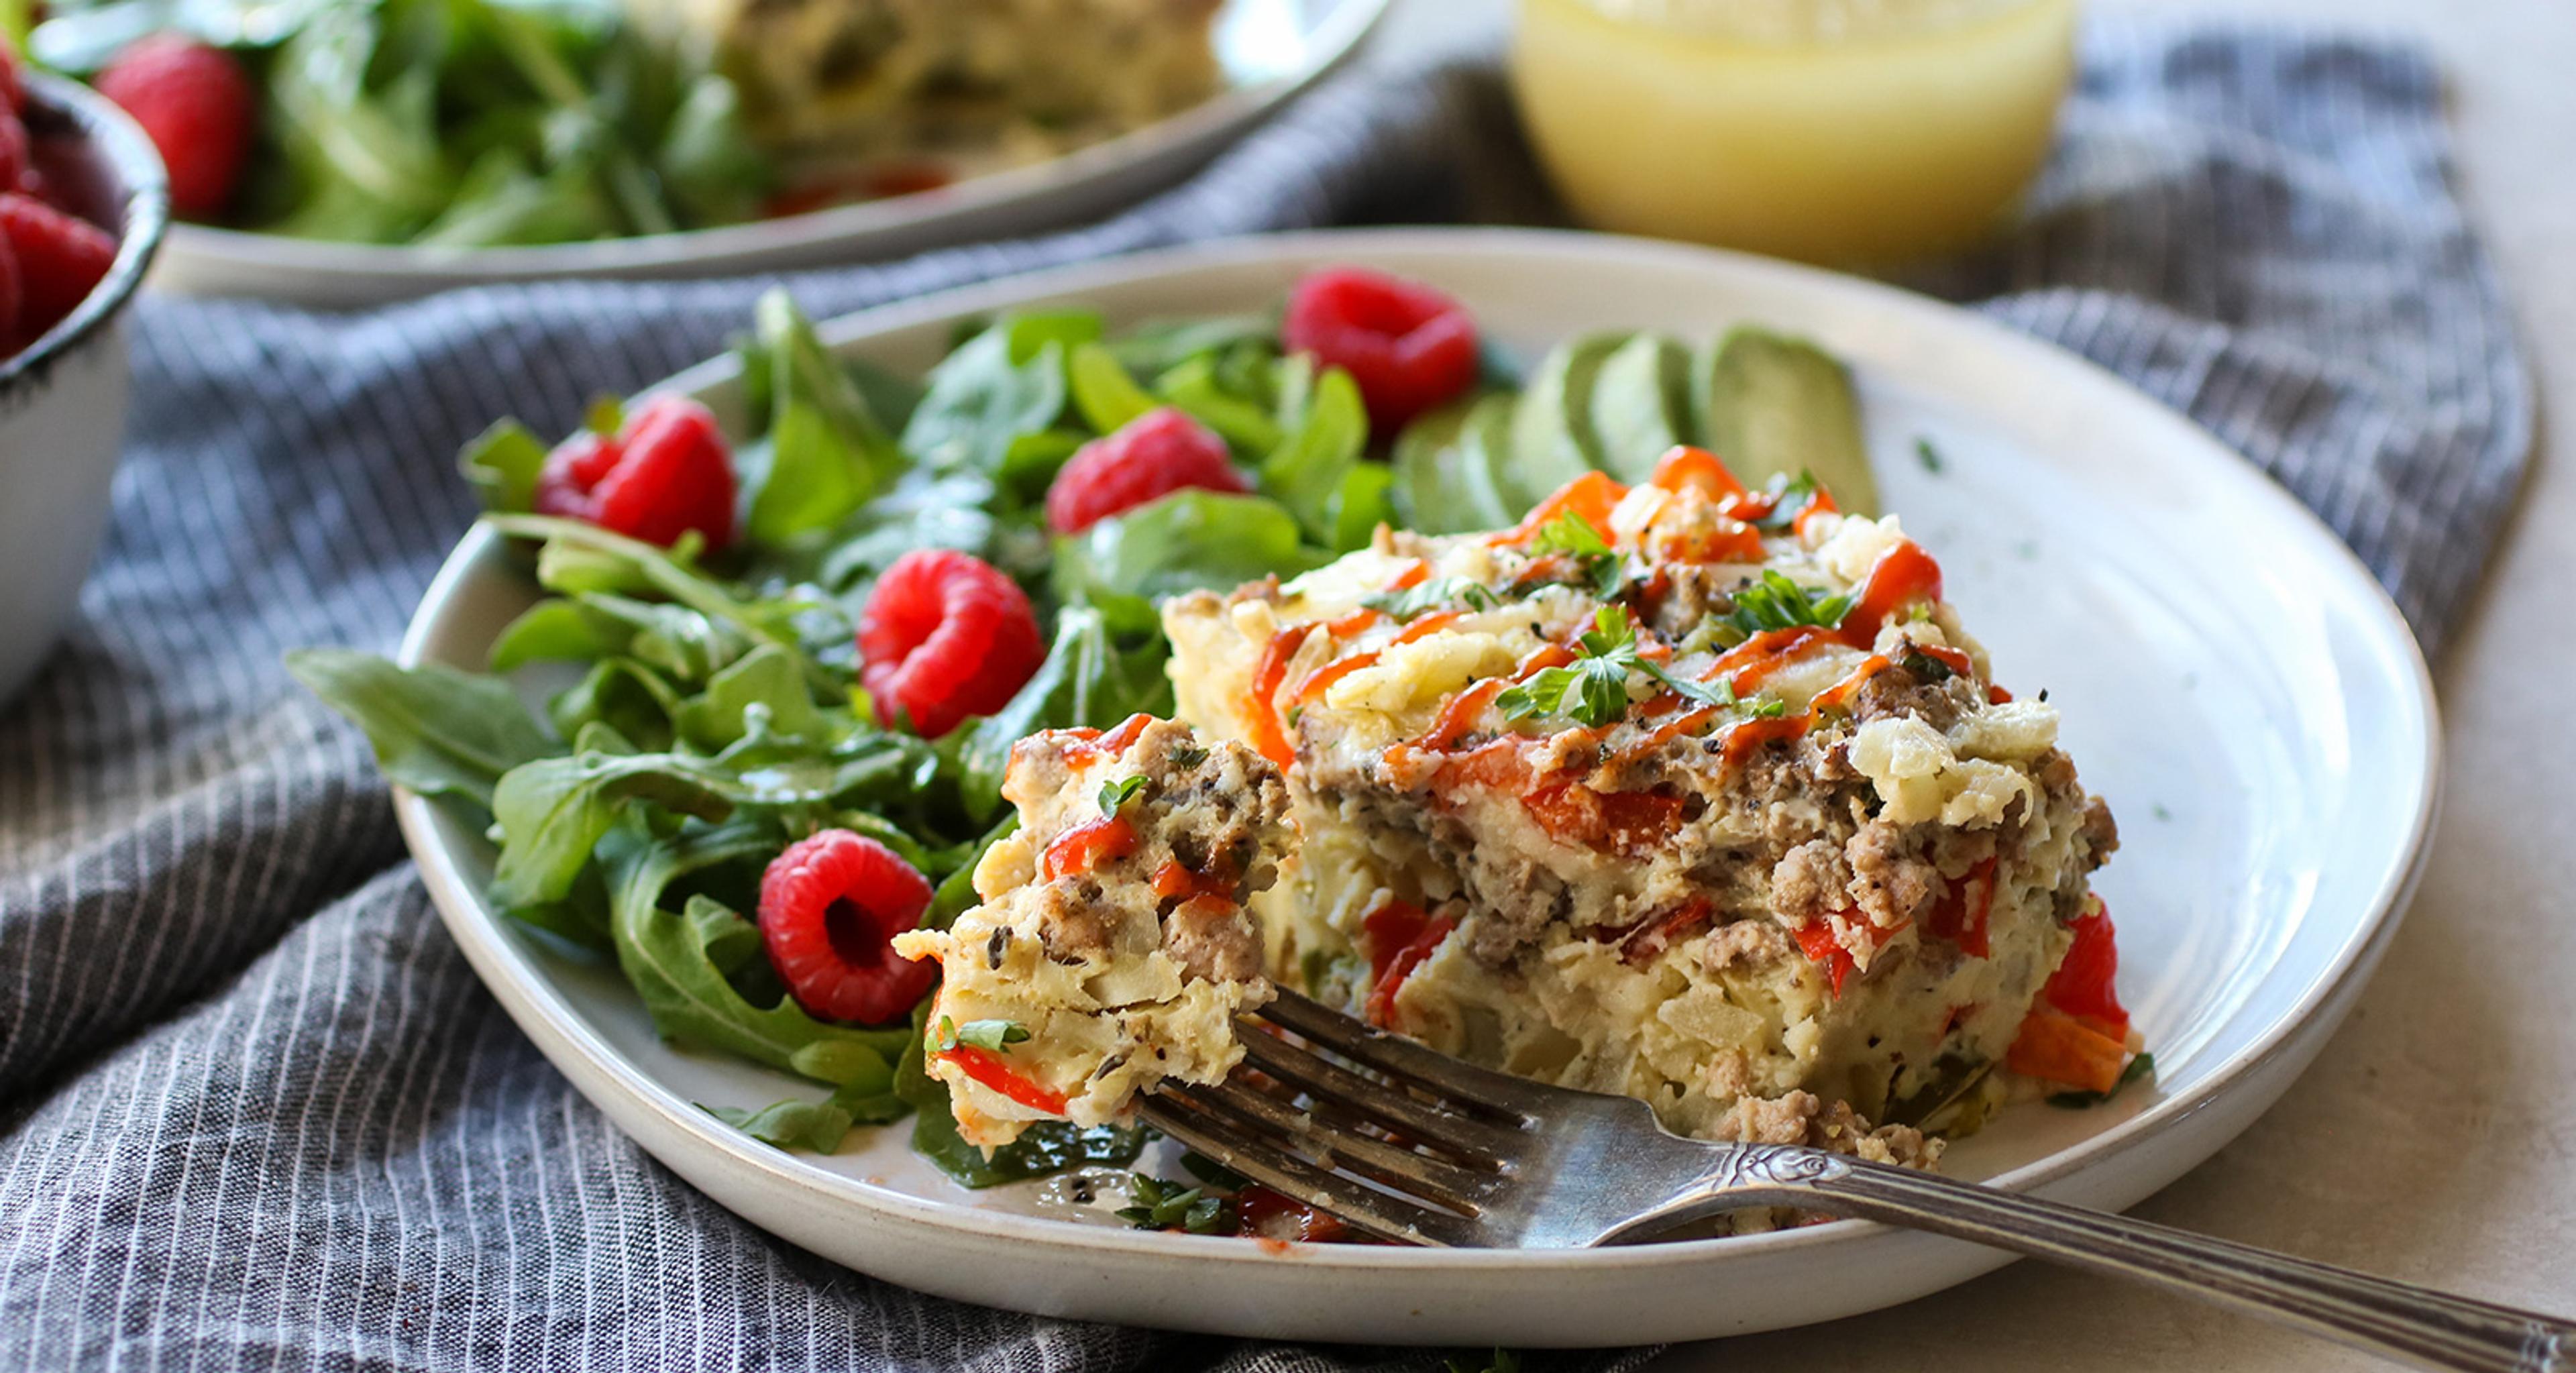 This Slow Cooker Turkey Sausage and Hashbrown Egg Bake can be easily modified into a strata by layering the ingredients. Photo by the Real Food Dietitians.